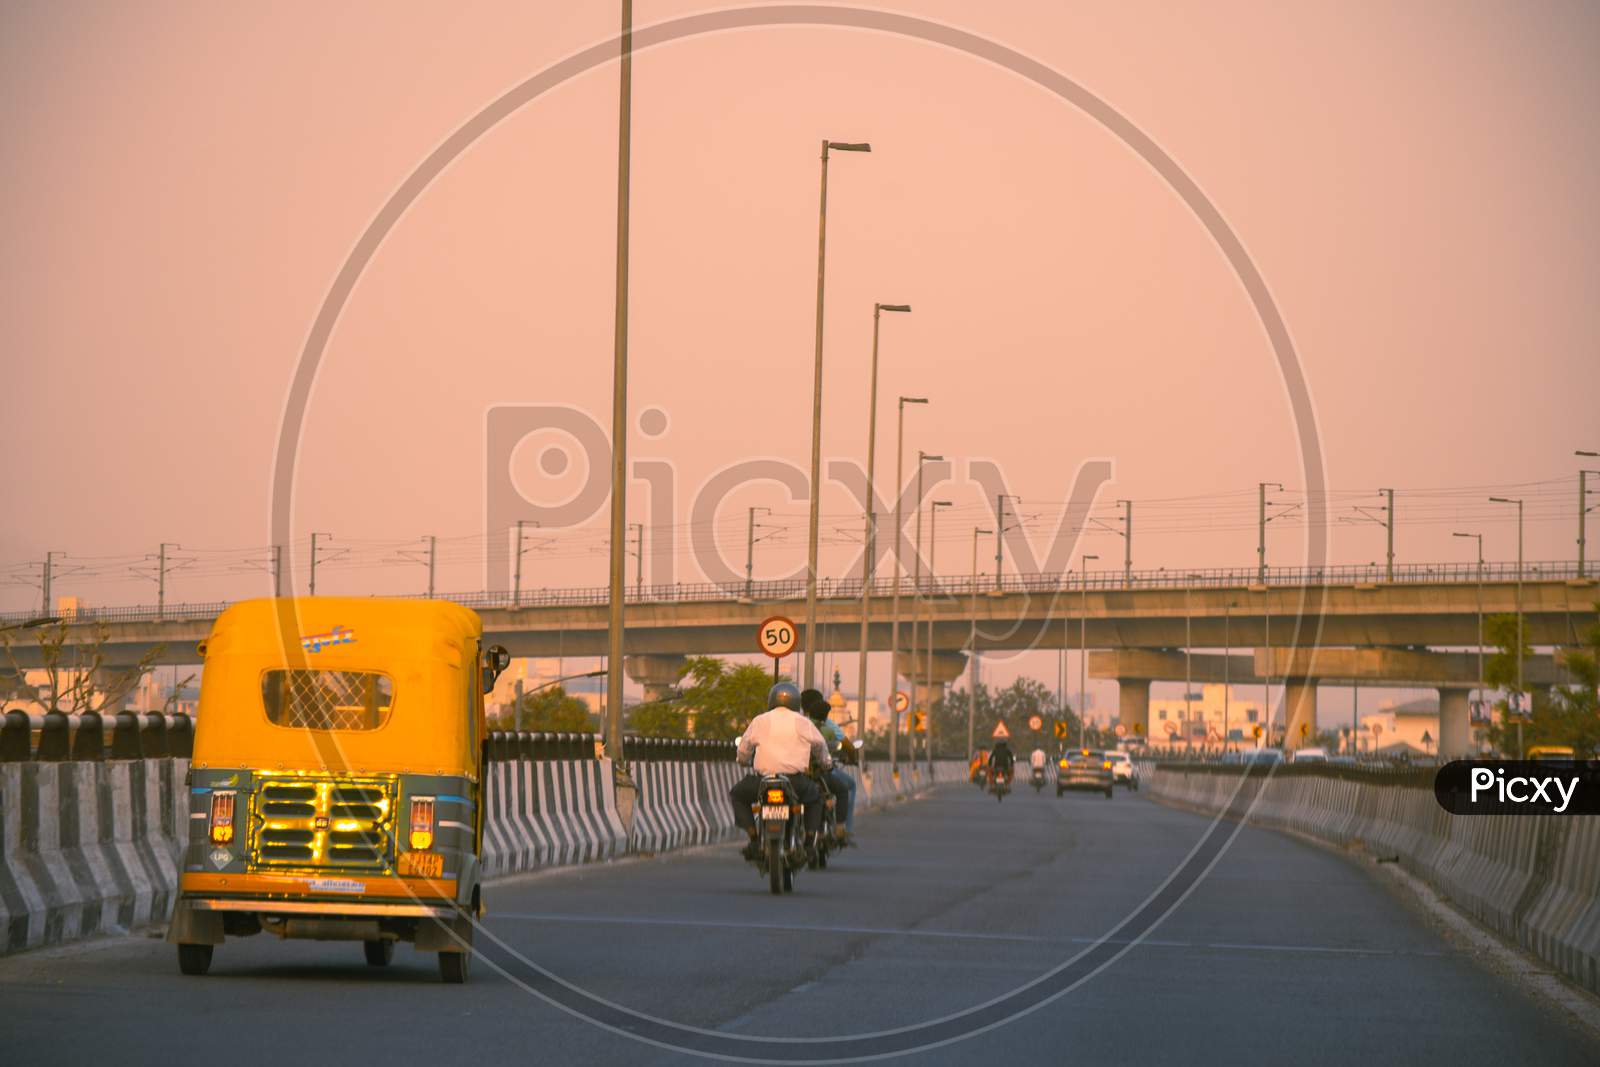 Traffic On Empty Street In Jaipur At Dusk With Golden Light And Autorickshaw Bikes On The Roads